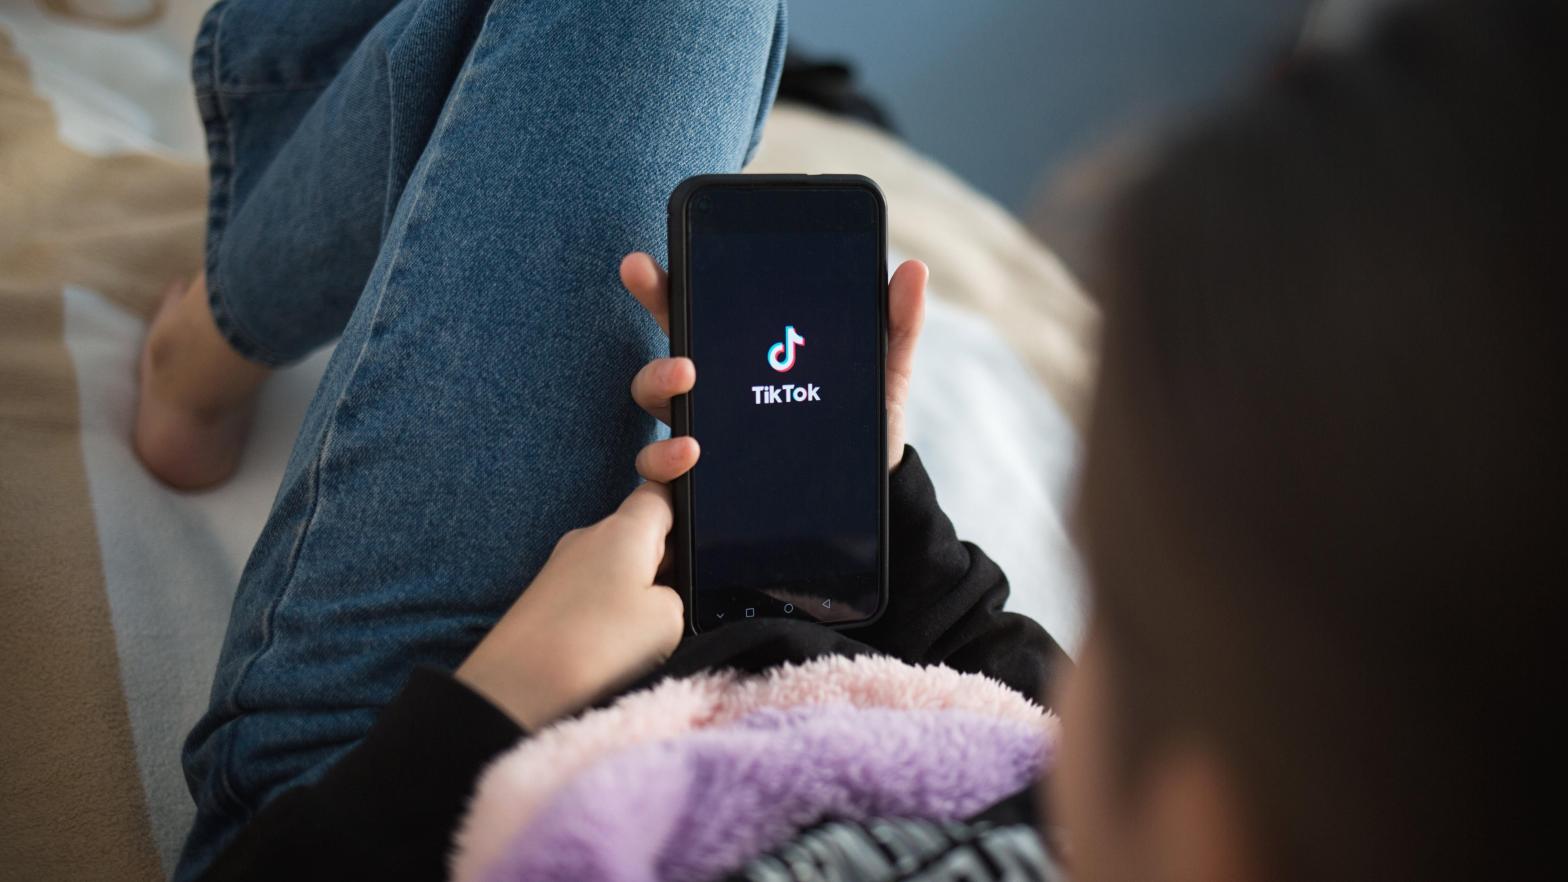 In a survey of over 1,400 from Boston Children's Hospital, TikTok was their second most used app.  (Image: phBodrova, Shutterstock)